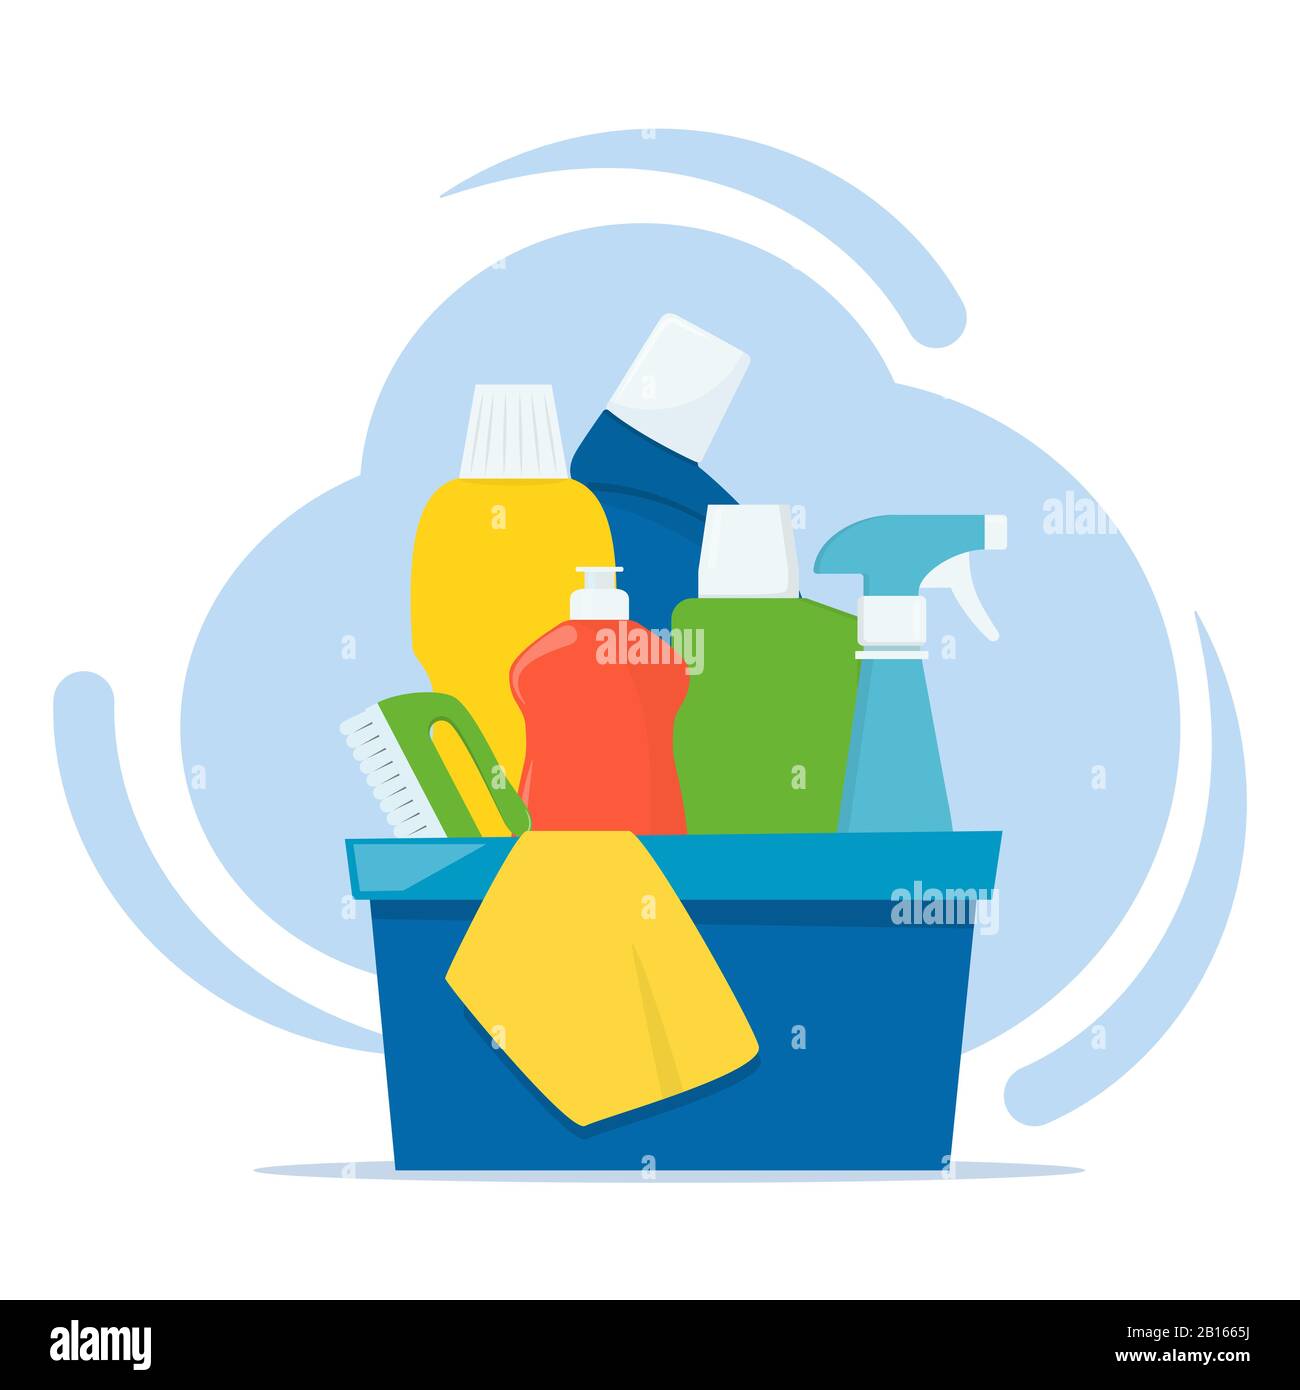 https://c8.alamy.com/comp/2B1665J/bottles-of-detergents-and-cleaning-products-in-a-box-rag-and-cleaning-brush-cleaning-services-concept-vector-illustration-flat-style-2B1665J.jpg